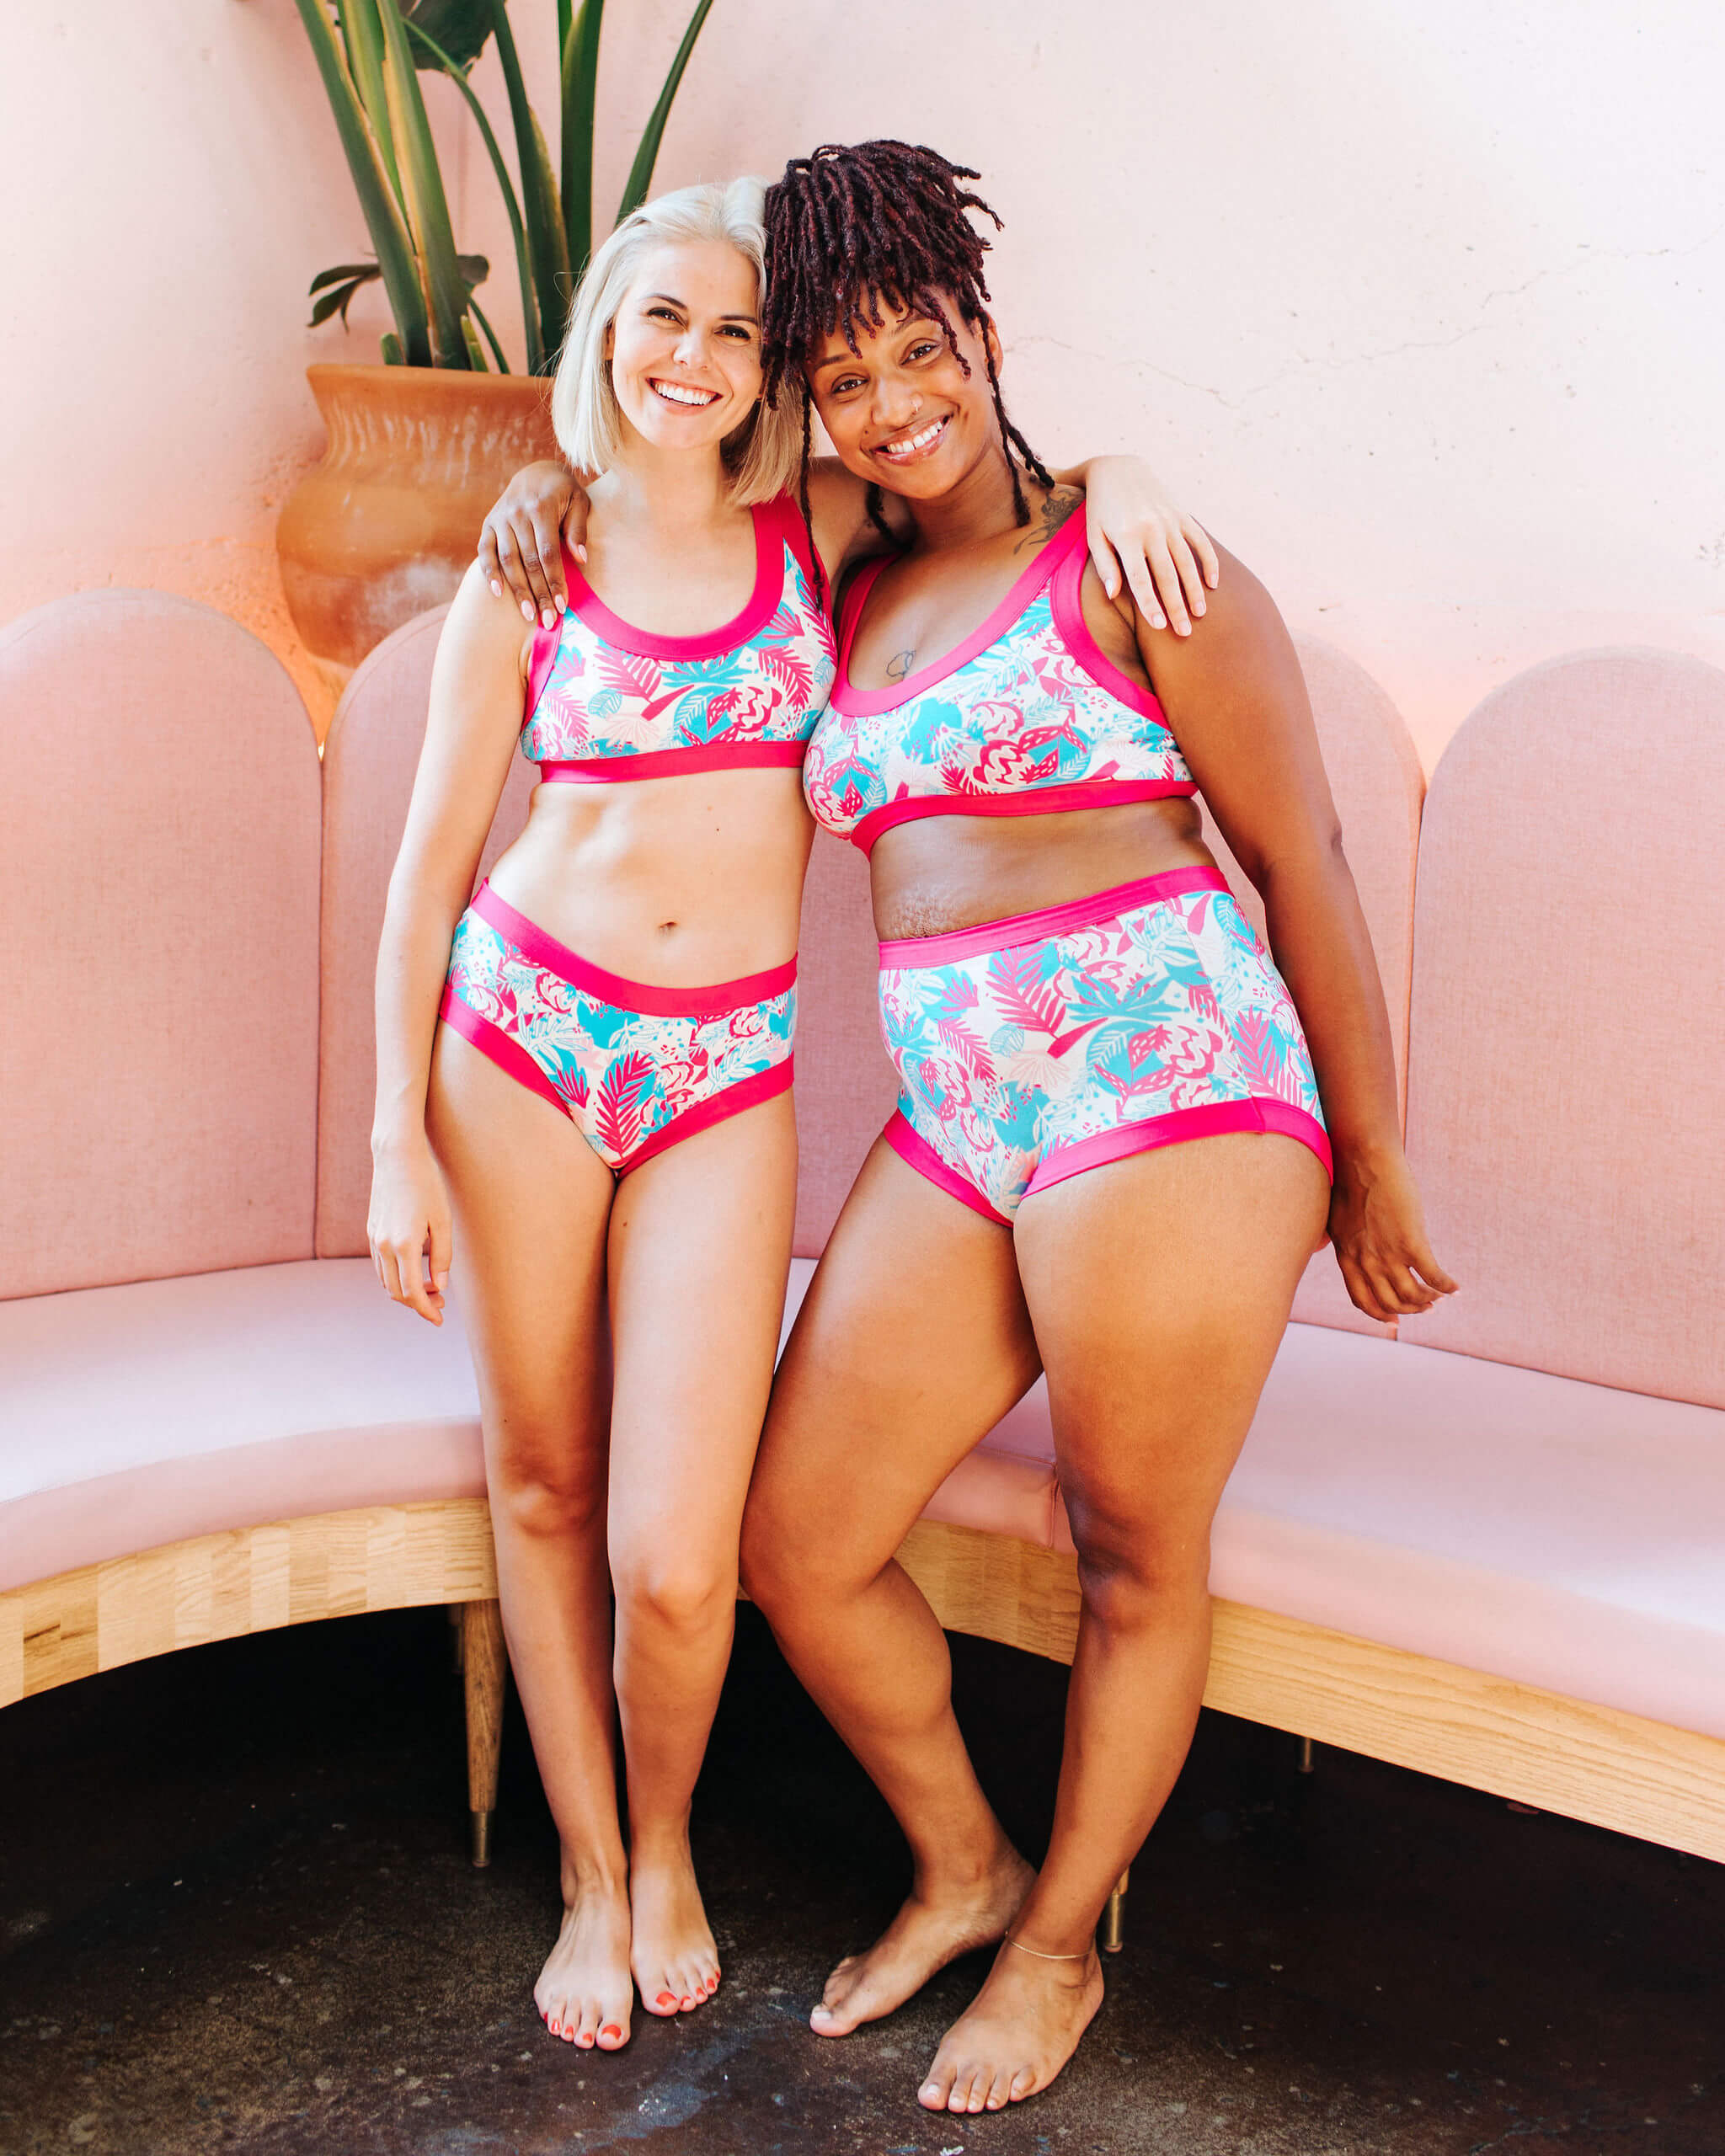 Two models smiling together wearing Thunderpants Hipster and Sky Rise style underwear with Bralettes in Finding Flamingo.